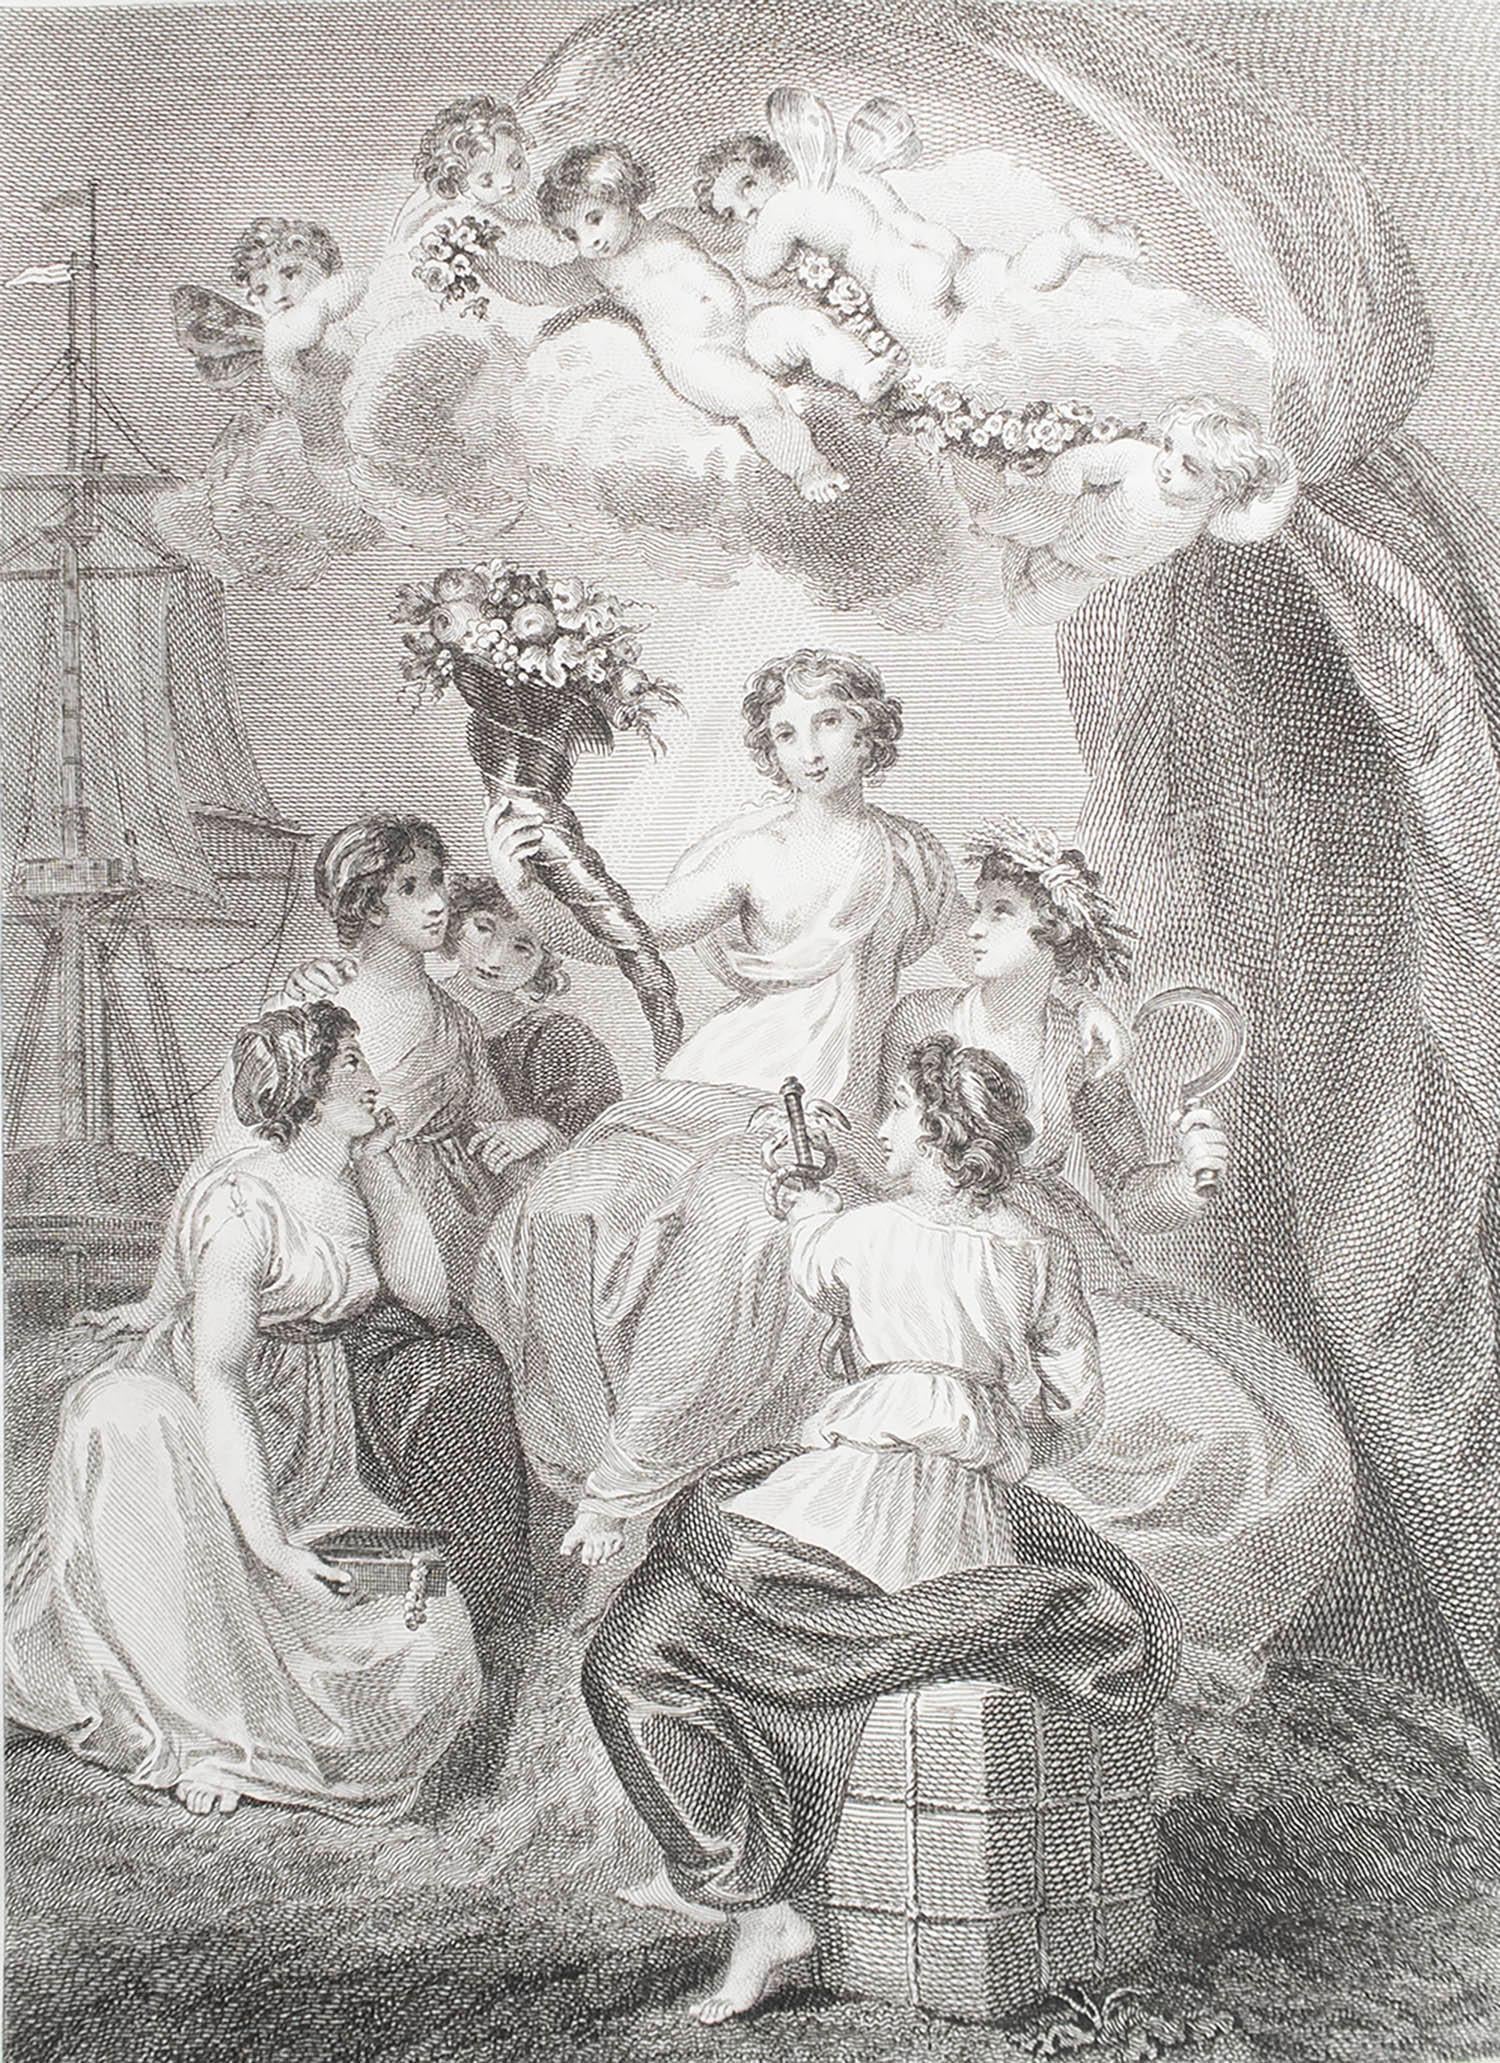 Great image of ladies and cherubs

Fine copper-plate engraving 

Published by I.Stocksdale. Dated 1795

Unframed.